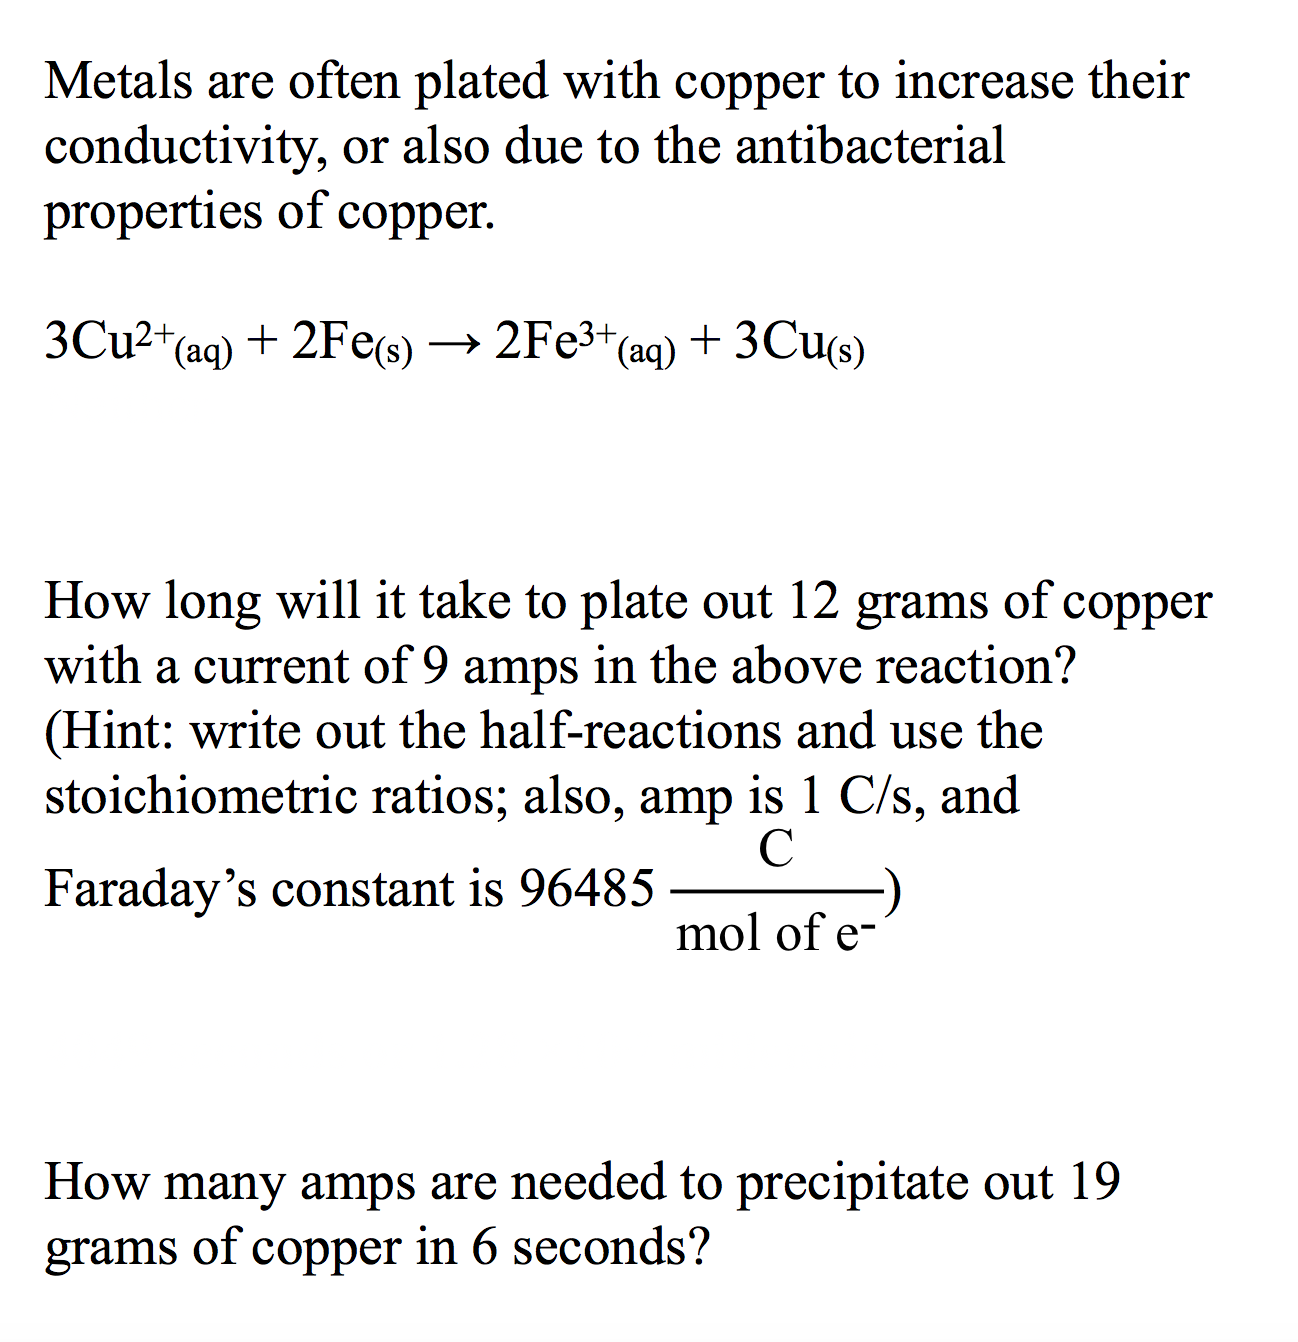 Metals are often plated with copper to increase their
conductivity, or also due to the antibacterial
properties of copper
3CU2 (aq)
+ 2Fes) —> 2Fезt (aq) + 3Cus)
How long will it take to plate out 12
with a current of 9 amps in the above reaction?
(Hint: write out the half-reactions and use the
stoichiometric ratios; also, amp is 1 C/s, and
of
grams
соpper
C
Faraday's constant is 96485
mol of e-
How many amps are needed to precipitate out 19
copper in 6 seconds?
of
grams
